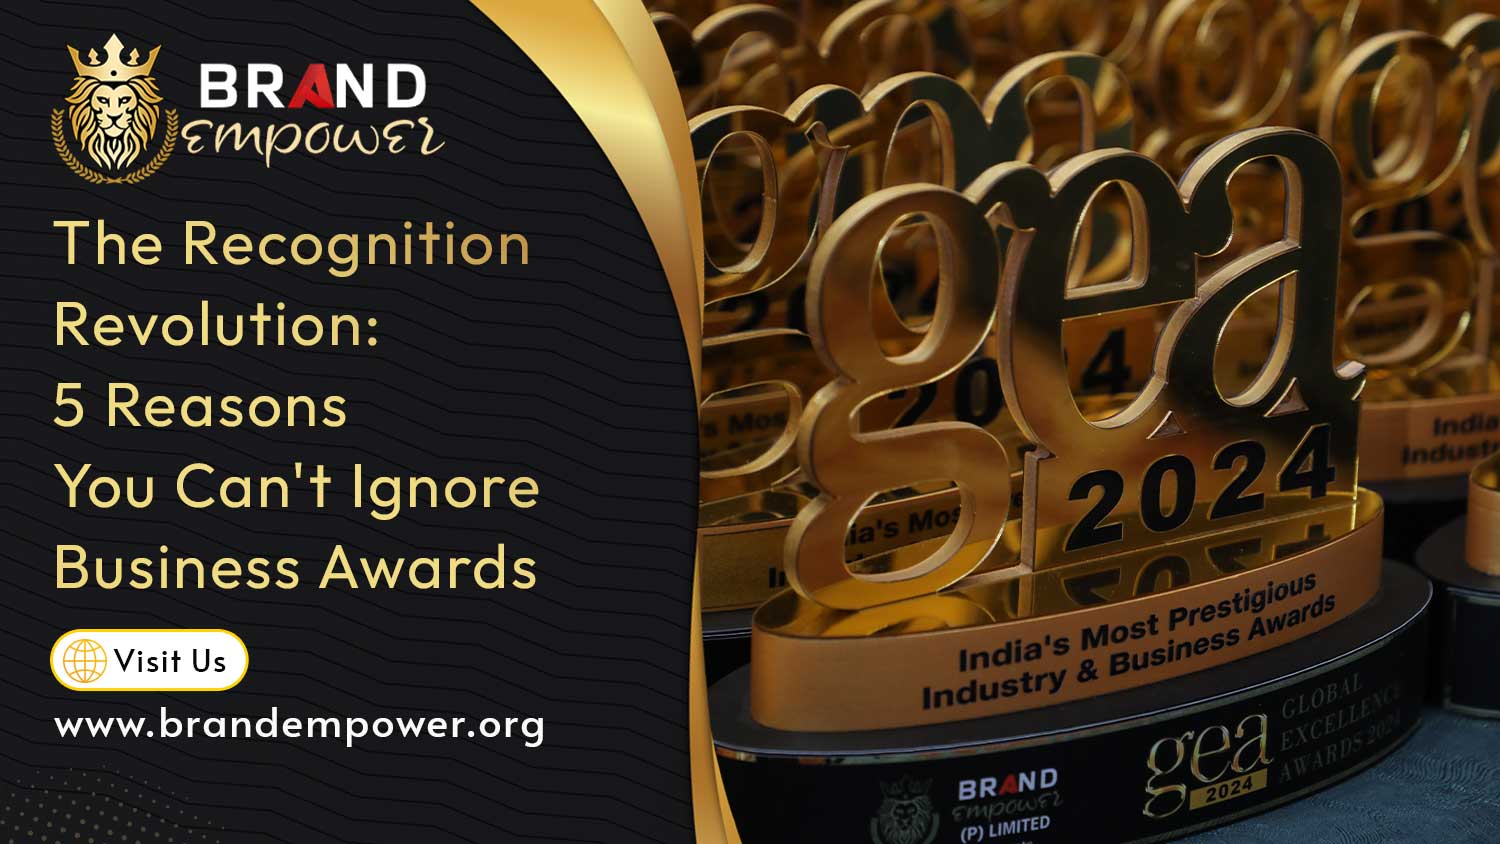 The Recognition Revolution 5 Reasons You Cannot Ignore Business Awards